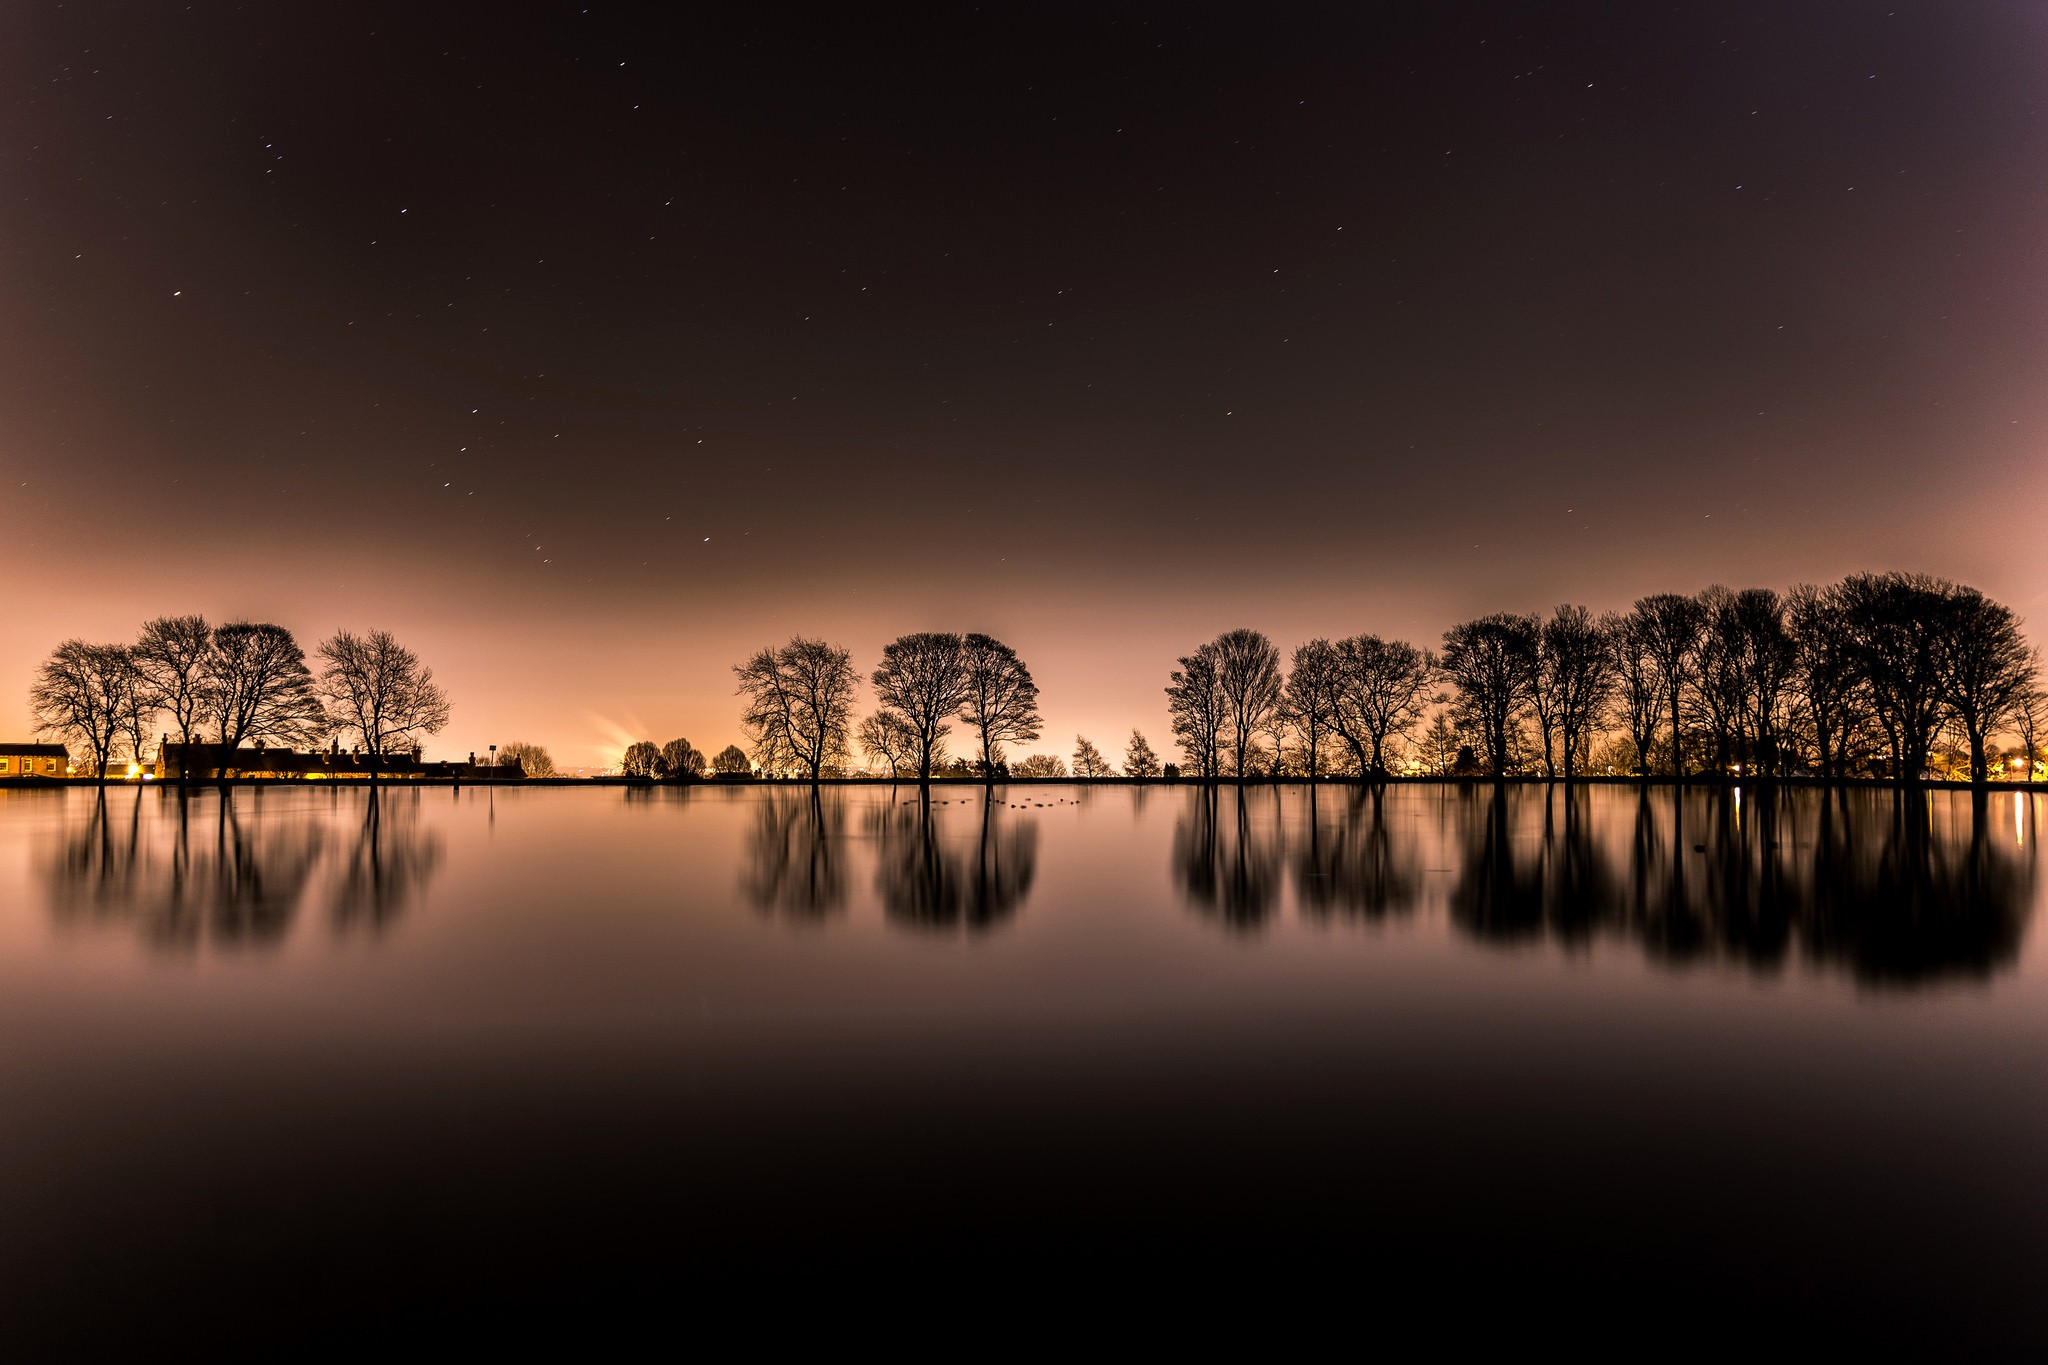 General 2048x1365 trees landscape lake reflection calm night nature sky stars calm waters water